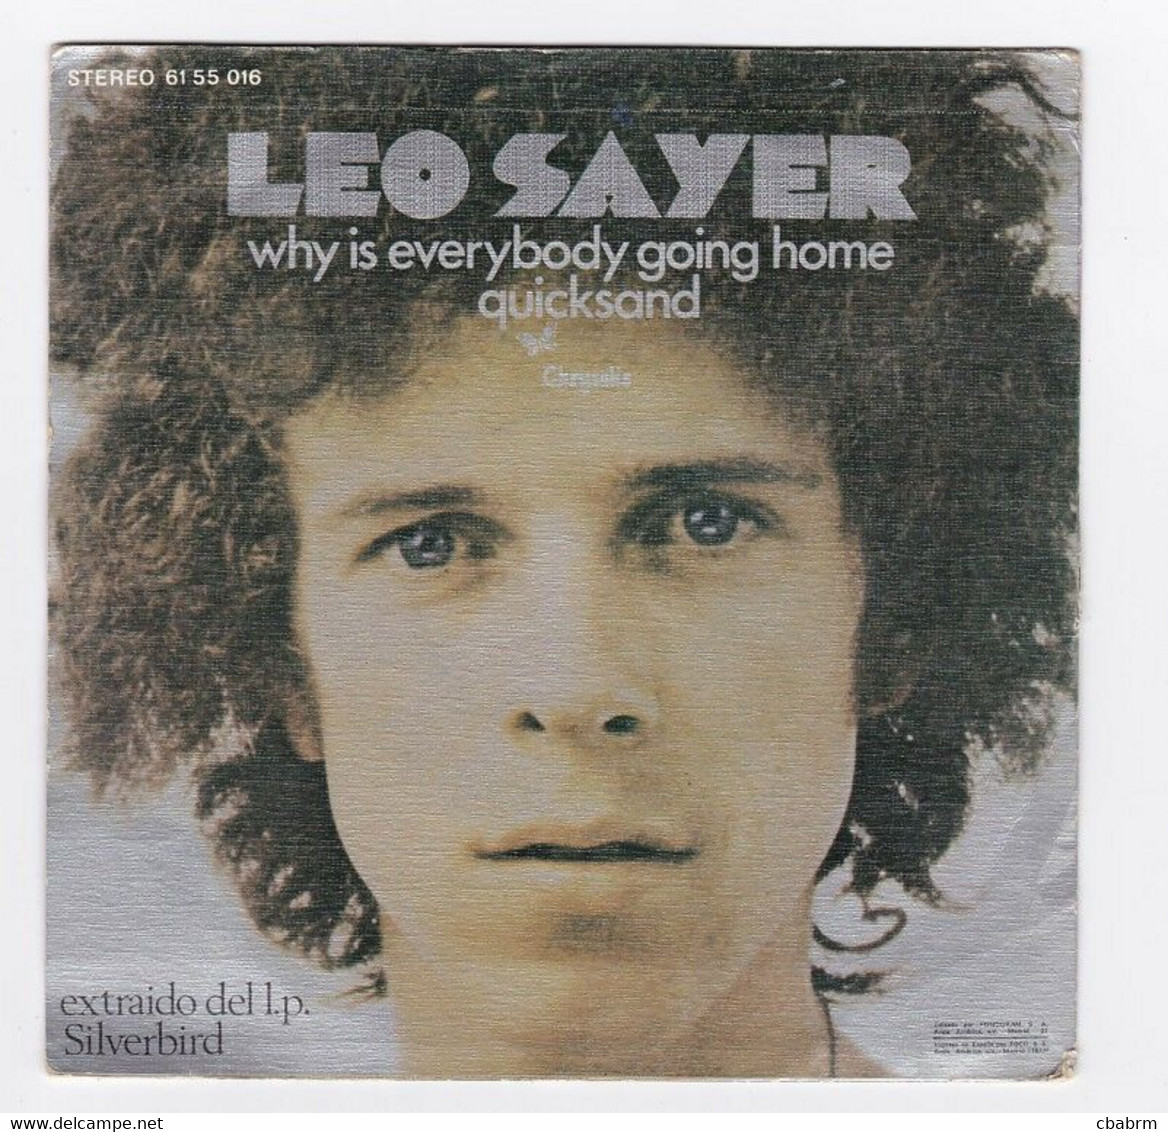 SP 45 TOURS LEO SAYER WHY IS EVERYBODY GOING HOME CHRYSALIS 61 55 016-B En 1973 - Disco, Pop